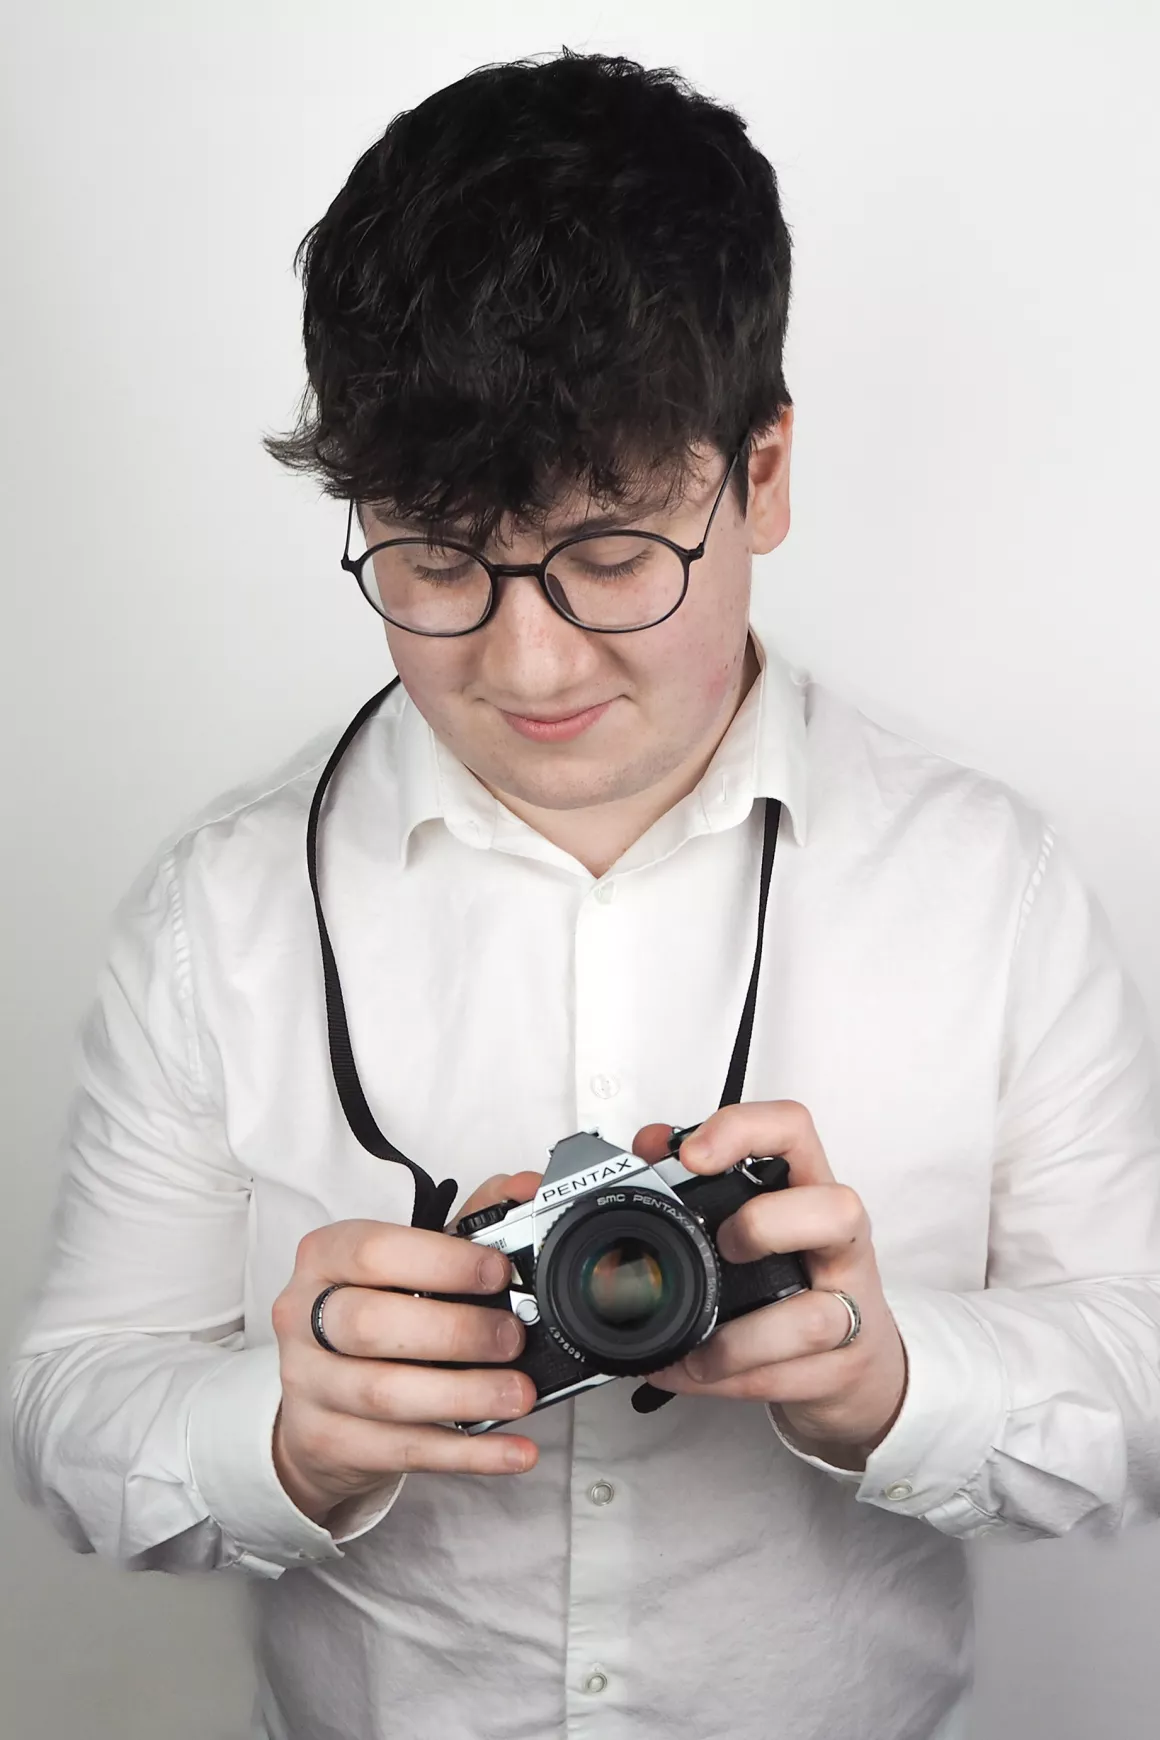 Tom Beale (Consultant) wearing white shirt and black glasses, holding prop which is a camera